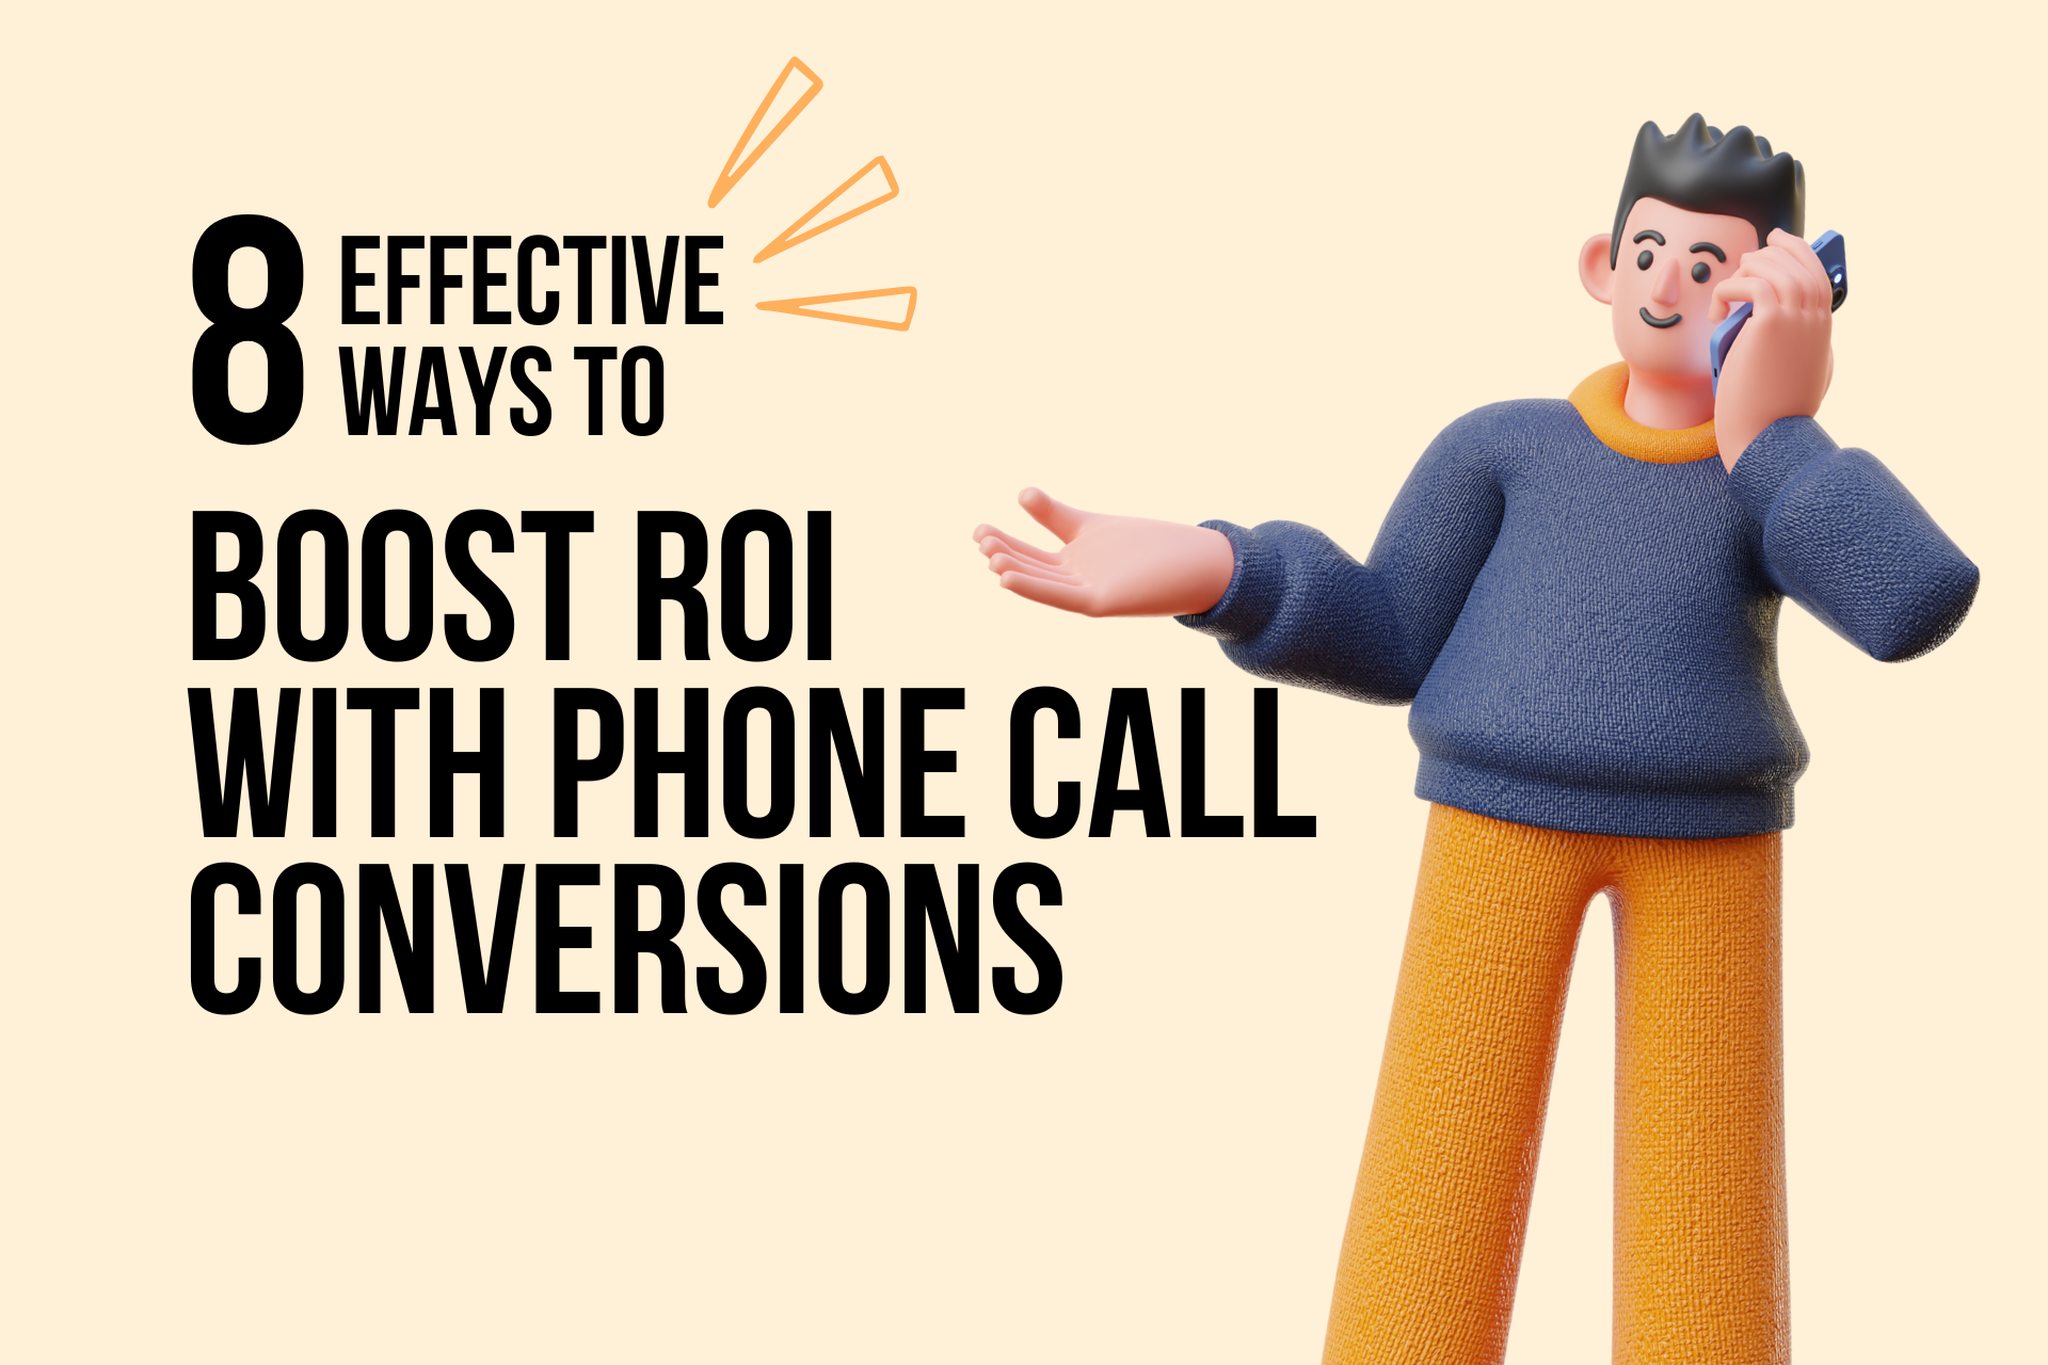 8 Effective Ways to Boost ROI with Phone Call Conversions